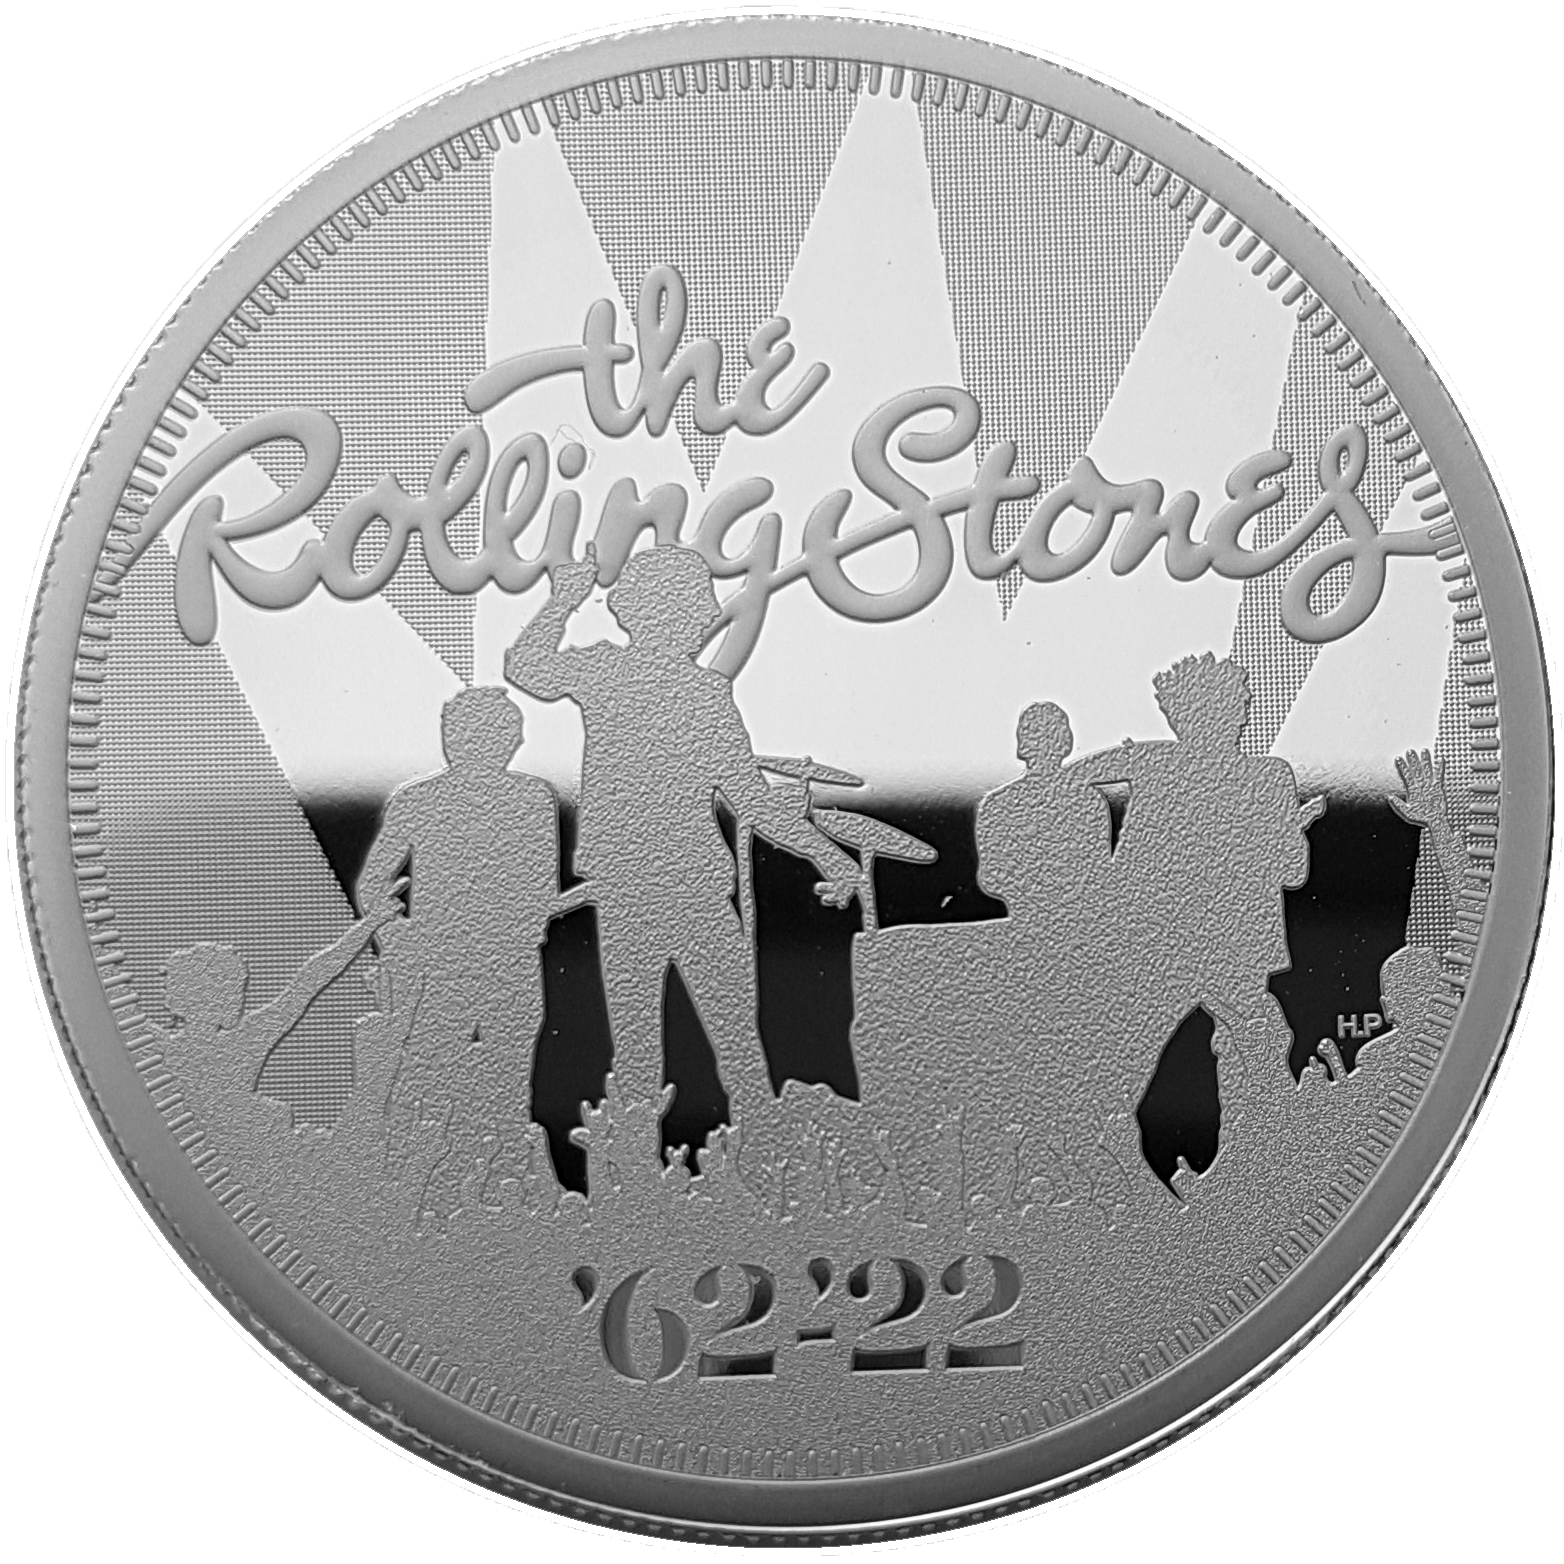 Rolling Stones Silver Coins